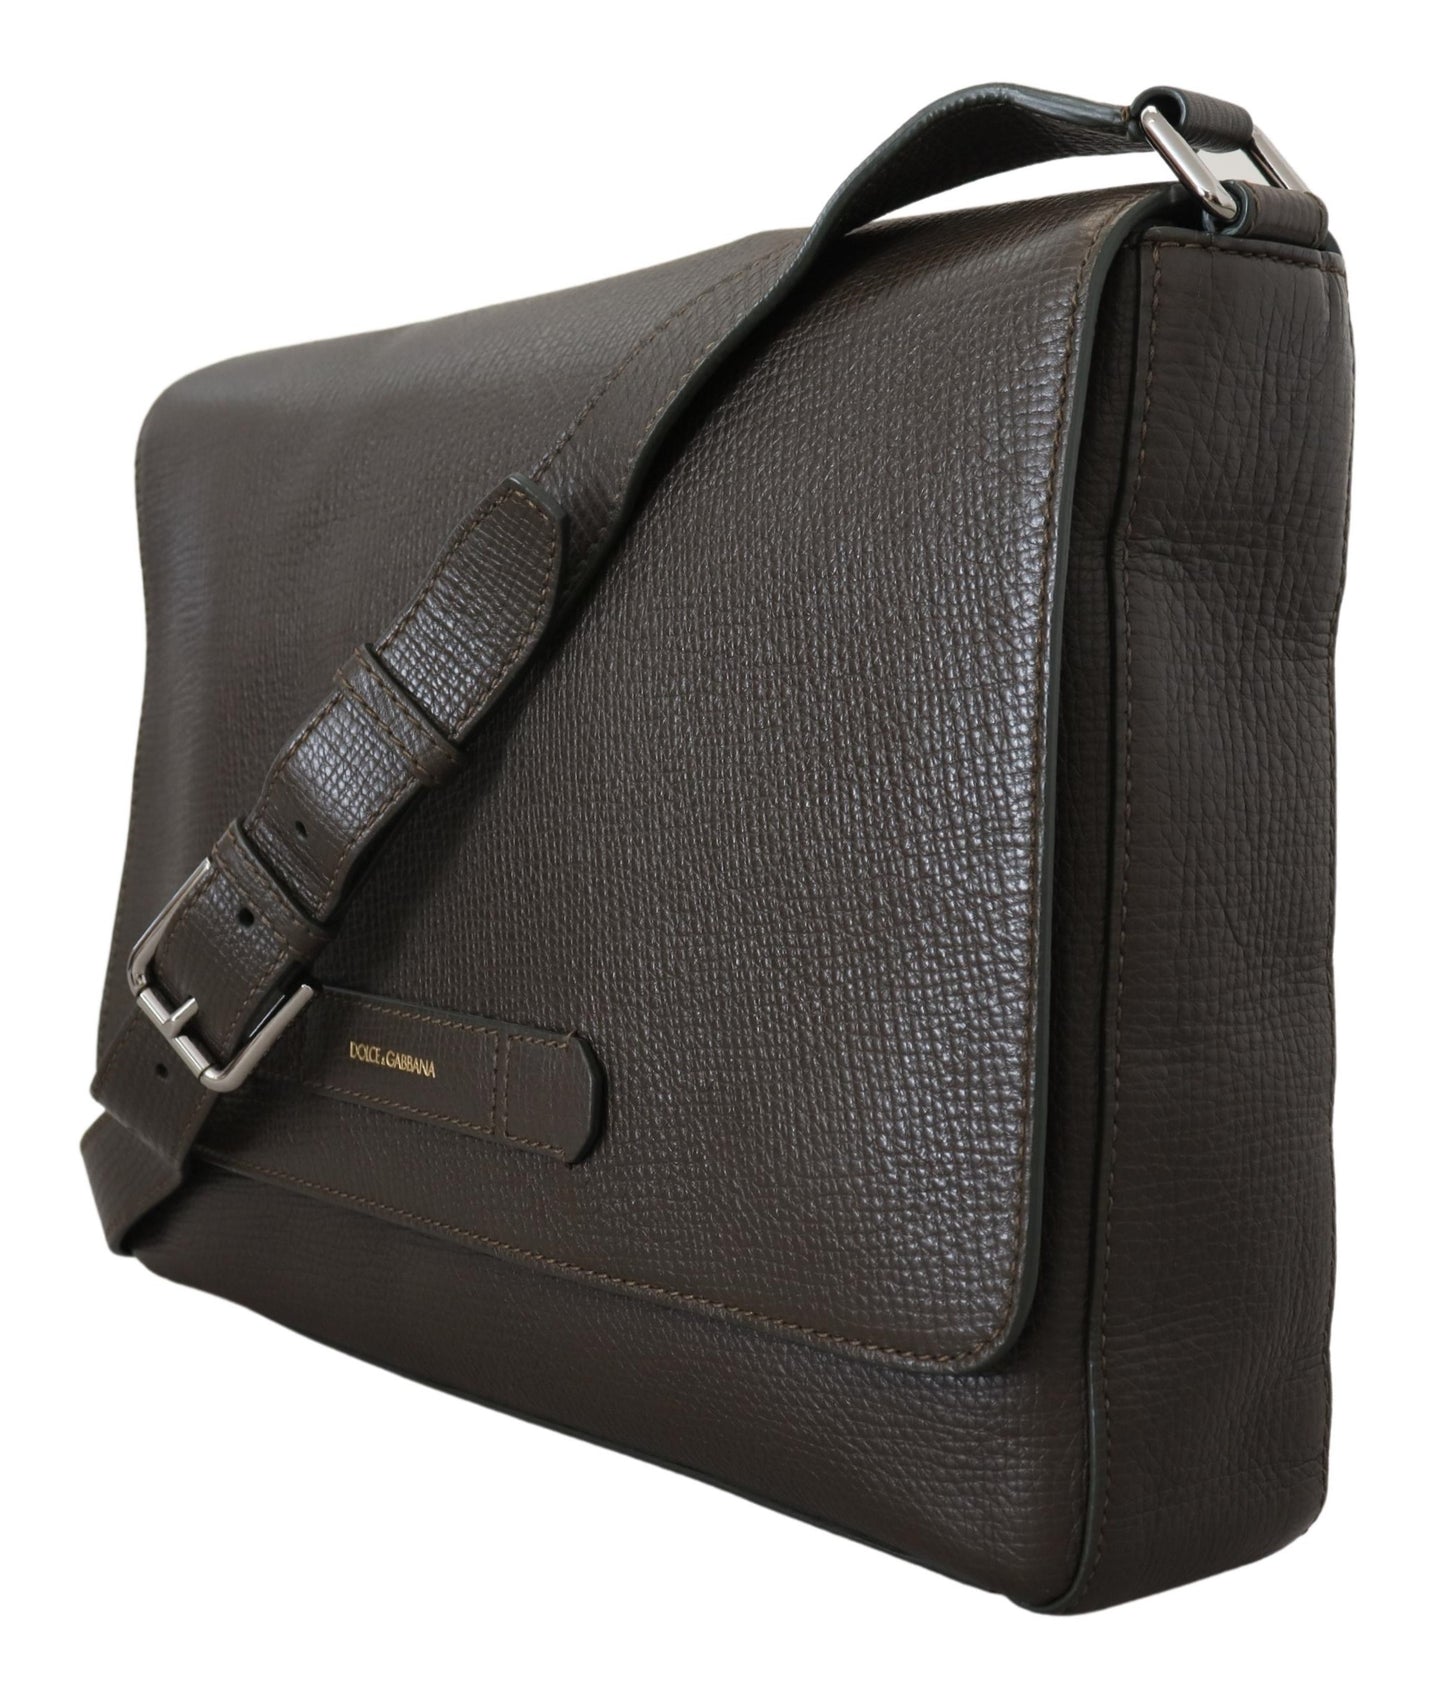 Authentic Textured Leather Messenger Bag